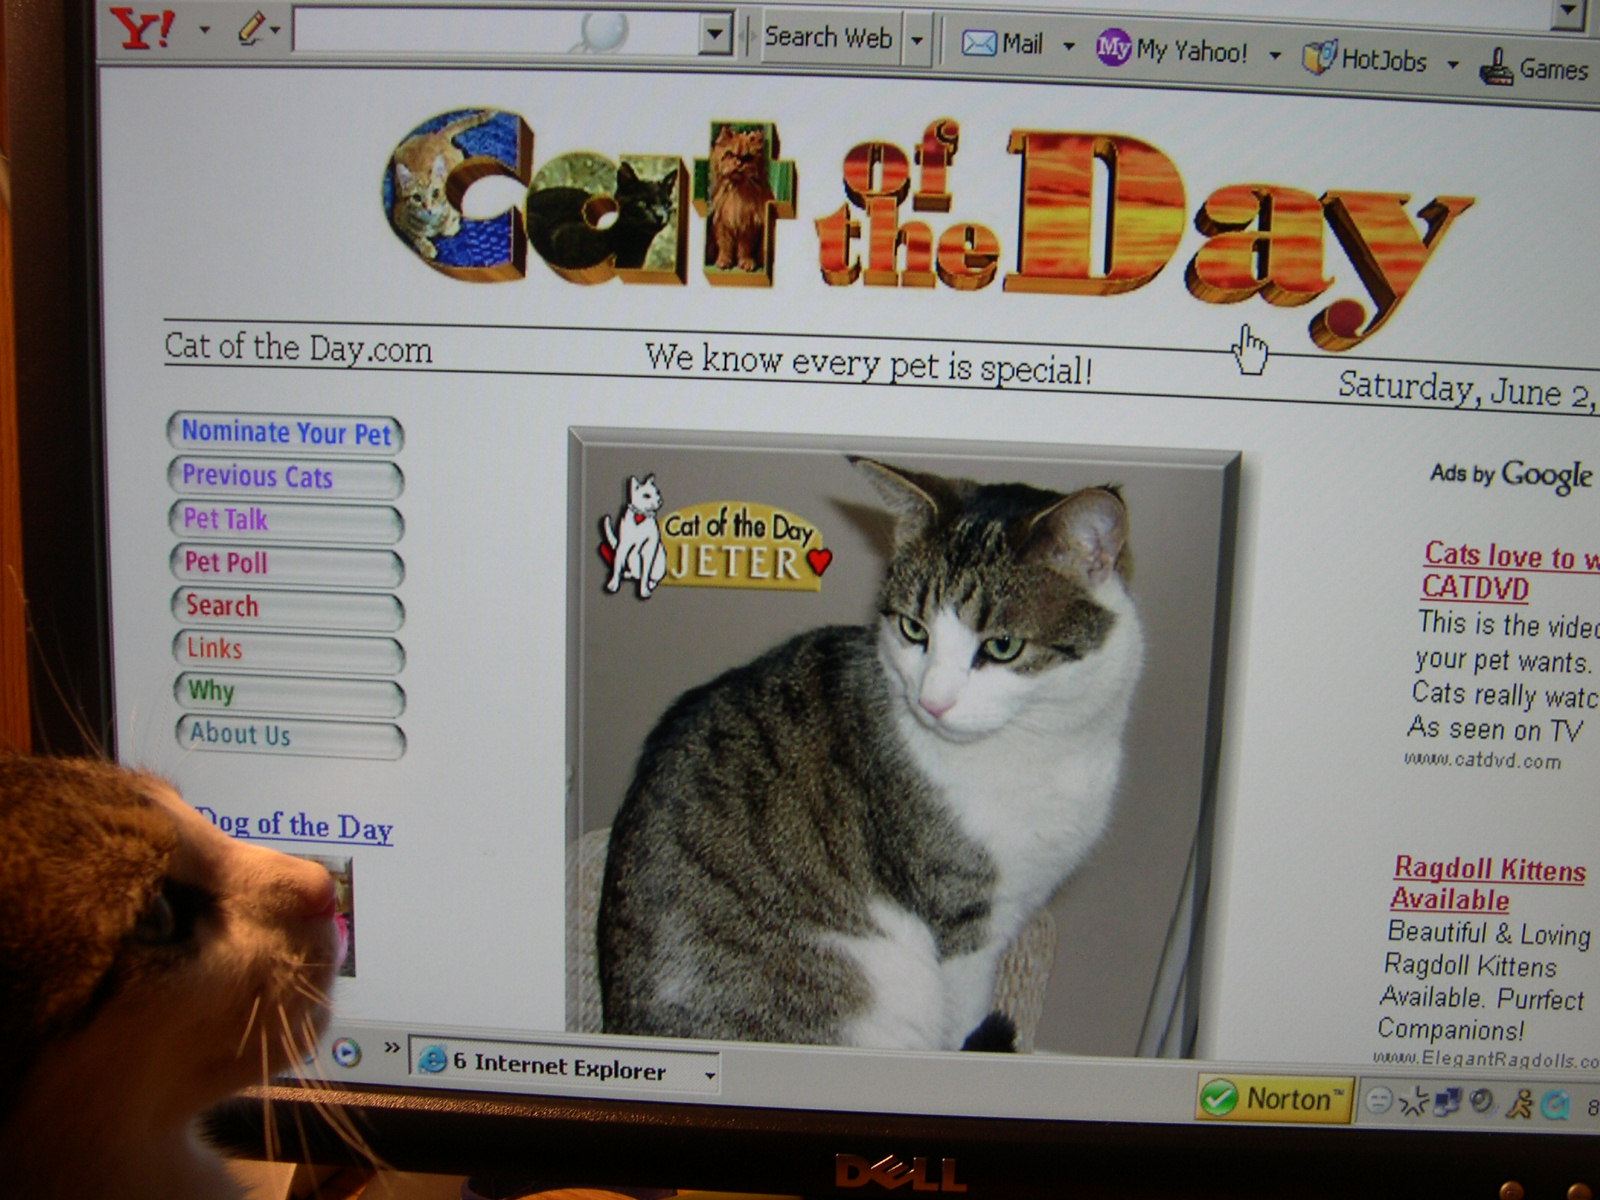 [cat+of+the+day+003.jpg]